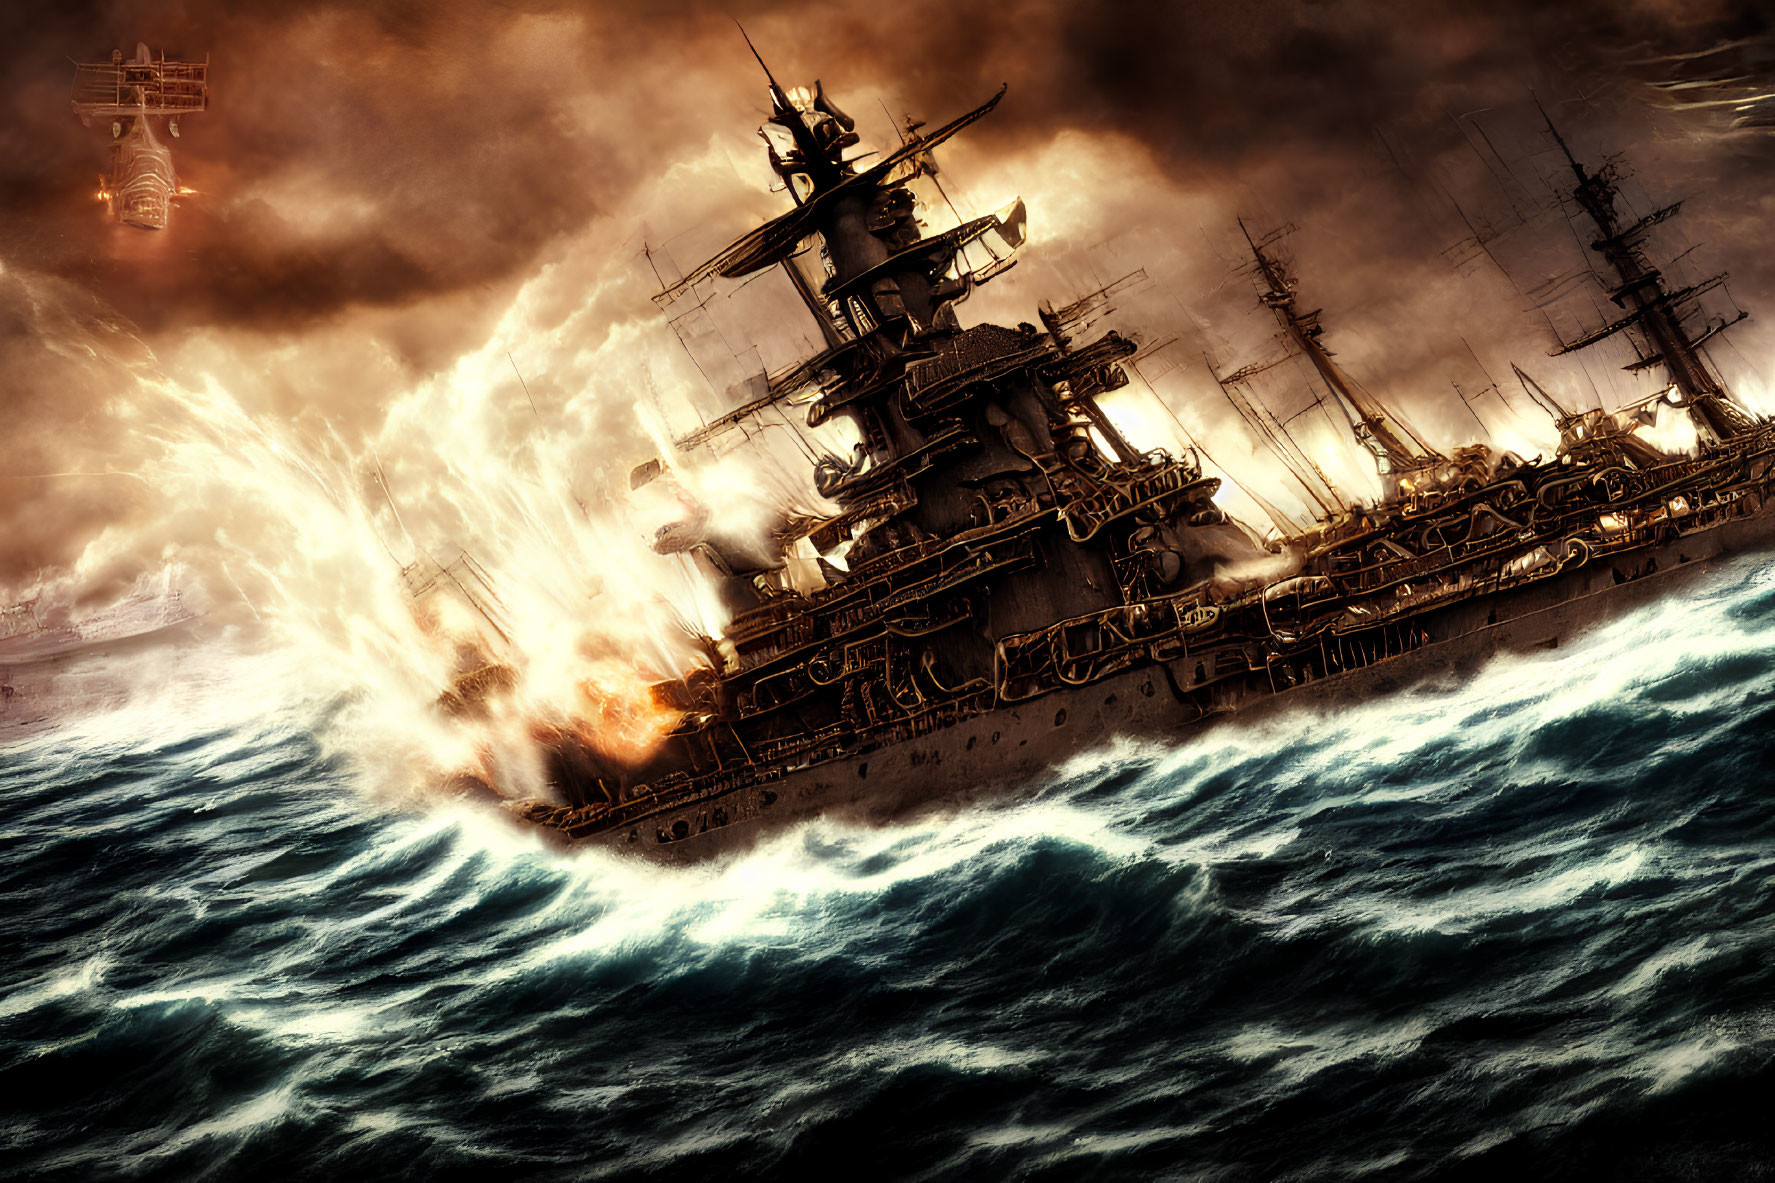 Digital artwork: Naval battle scene with warships, explosions, and stormy sky